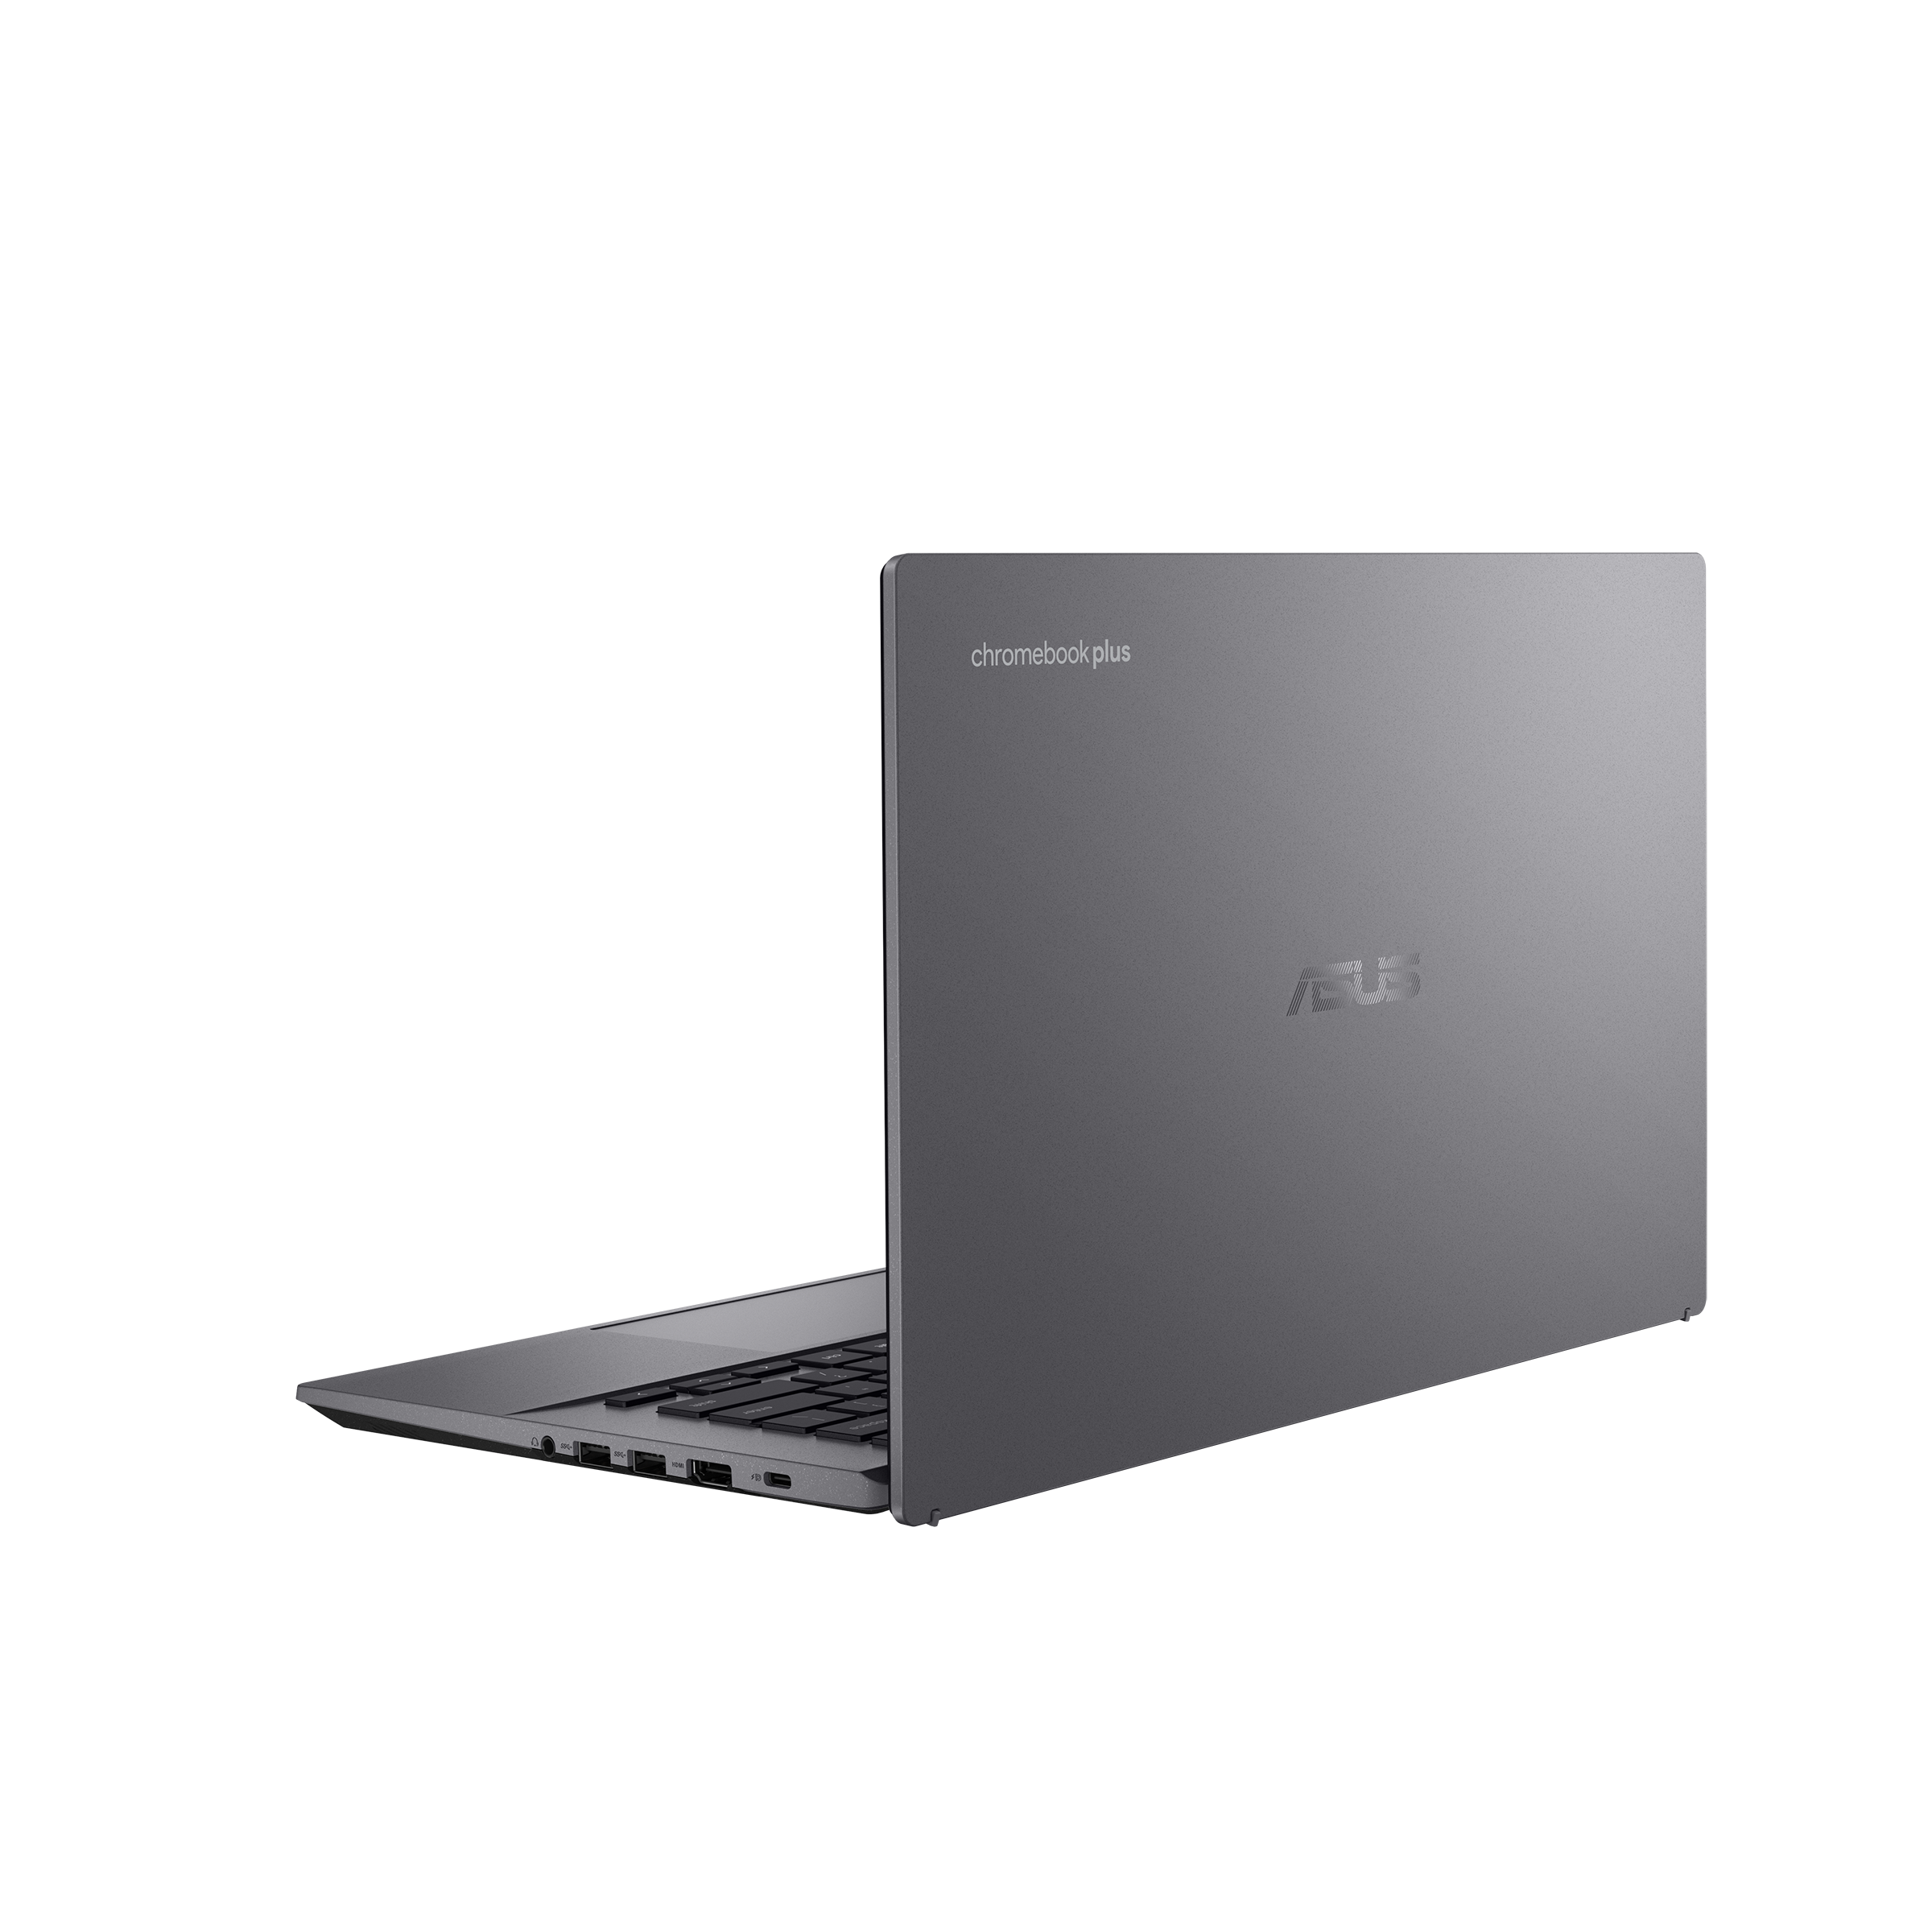 ASUS Chromebook Plus CX34: The Chromebook That Could Change the